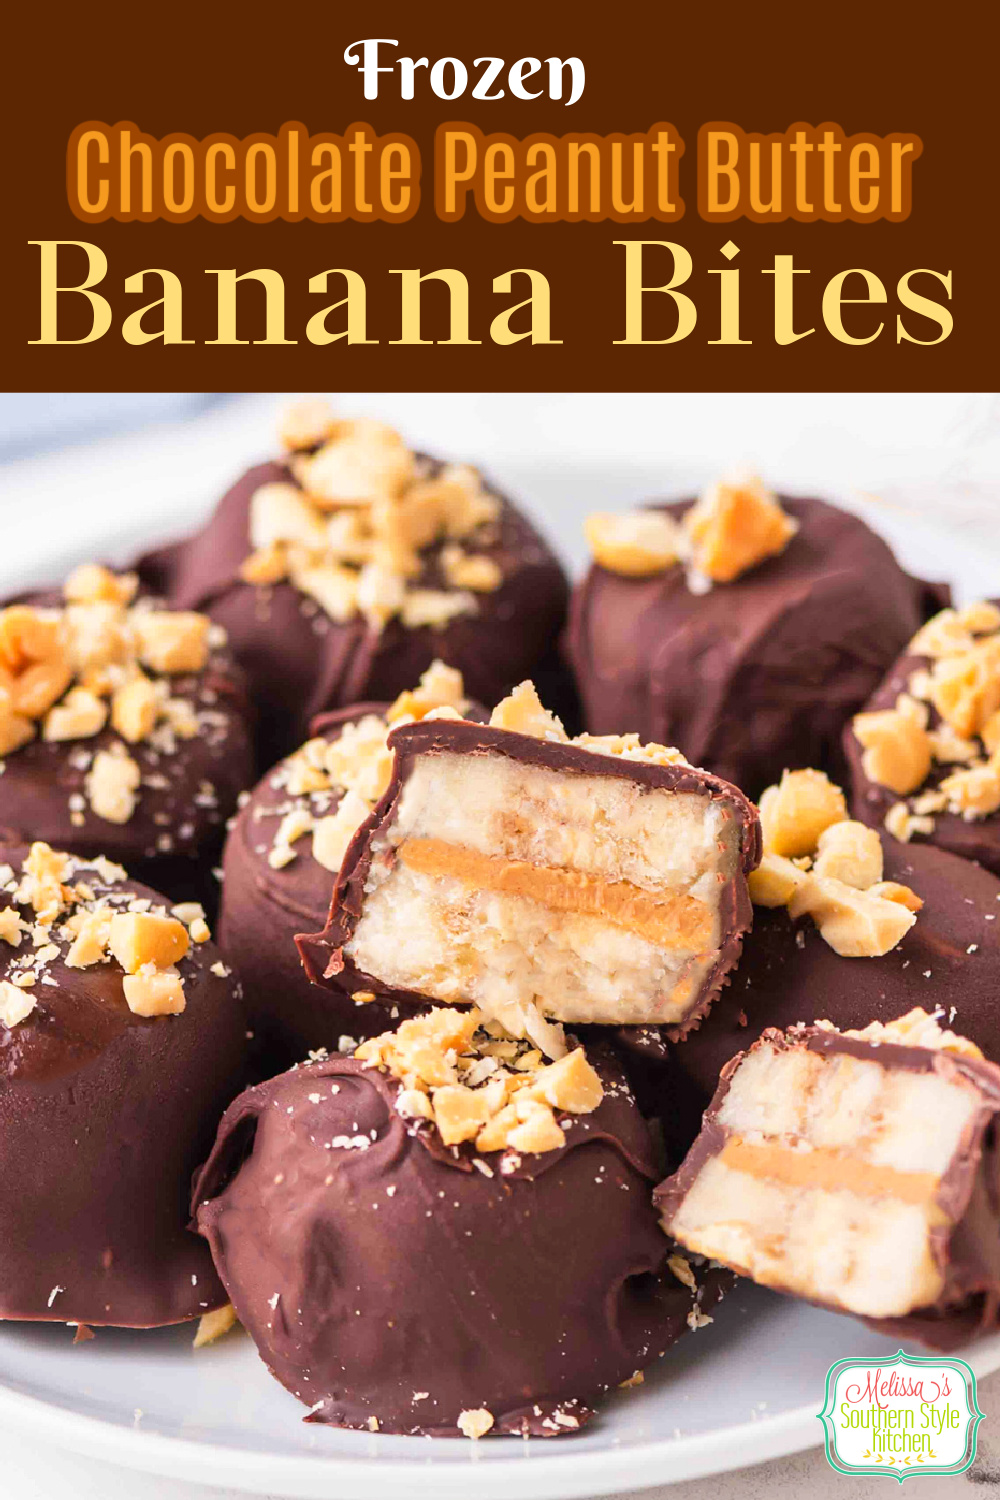 These frozen Chocolate Peanut Butter Banana Bites are perfectly portioned for a two bite way to satisfy your sweets craving #bananas #bananabites #chocolatebananas #frozendesserts #frozenbananas #peanutbutter #peanutbutterbananas #sweets #easydessertrecipes